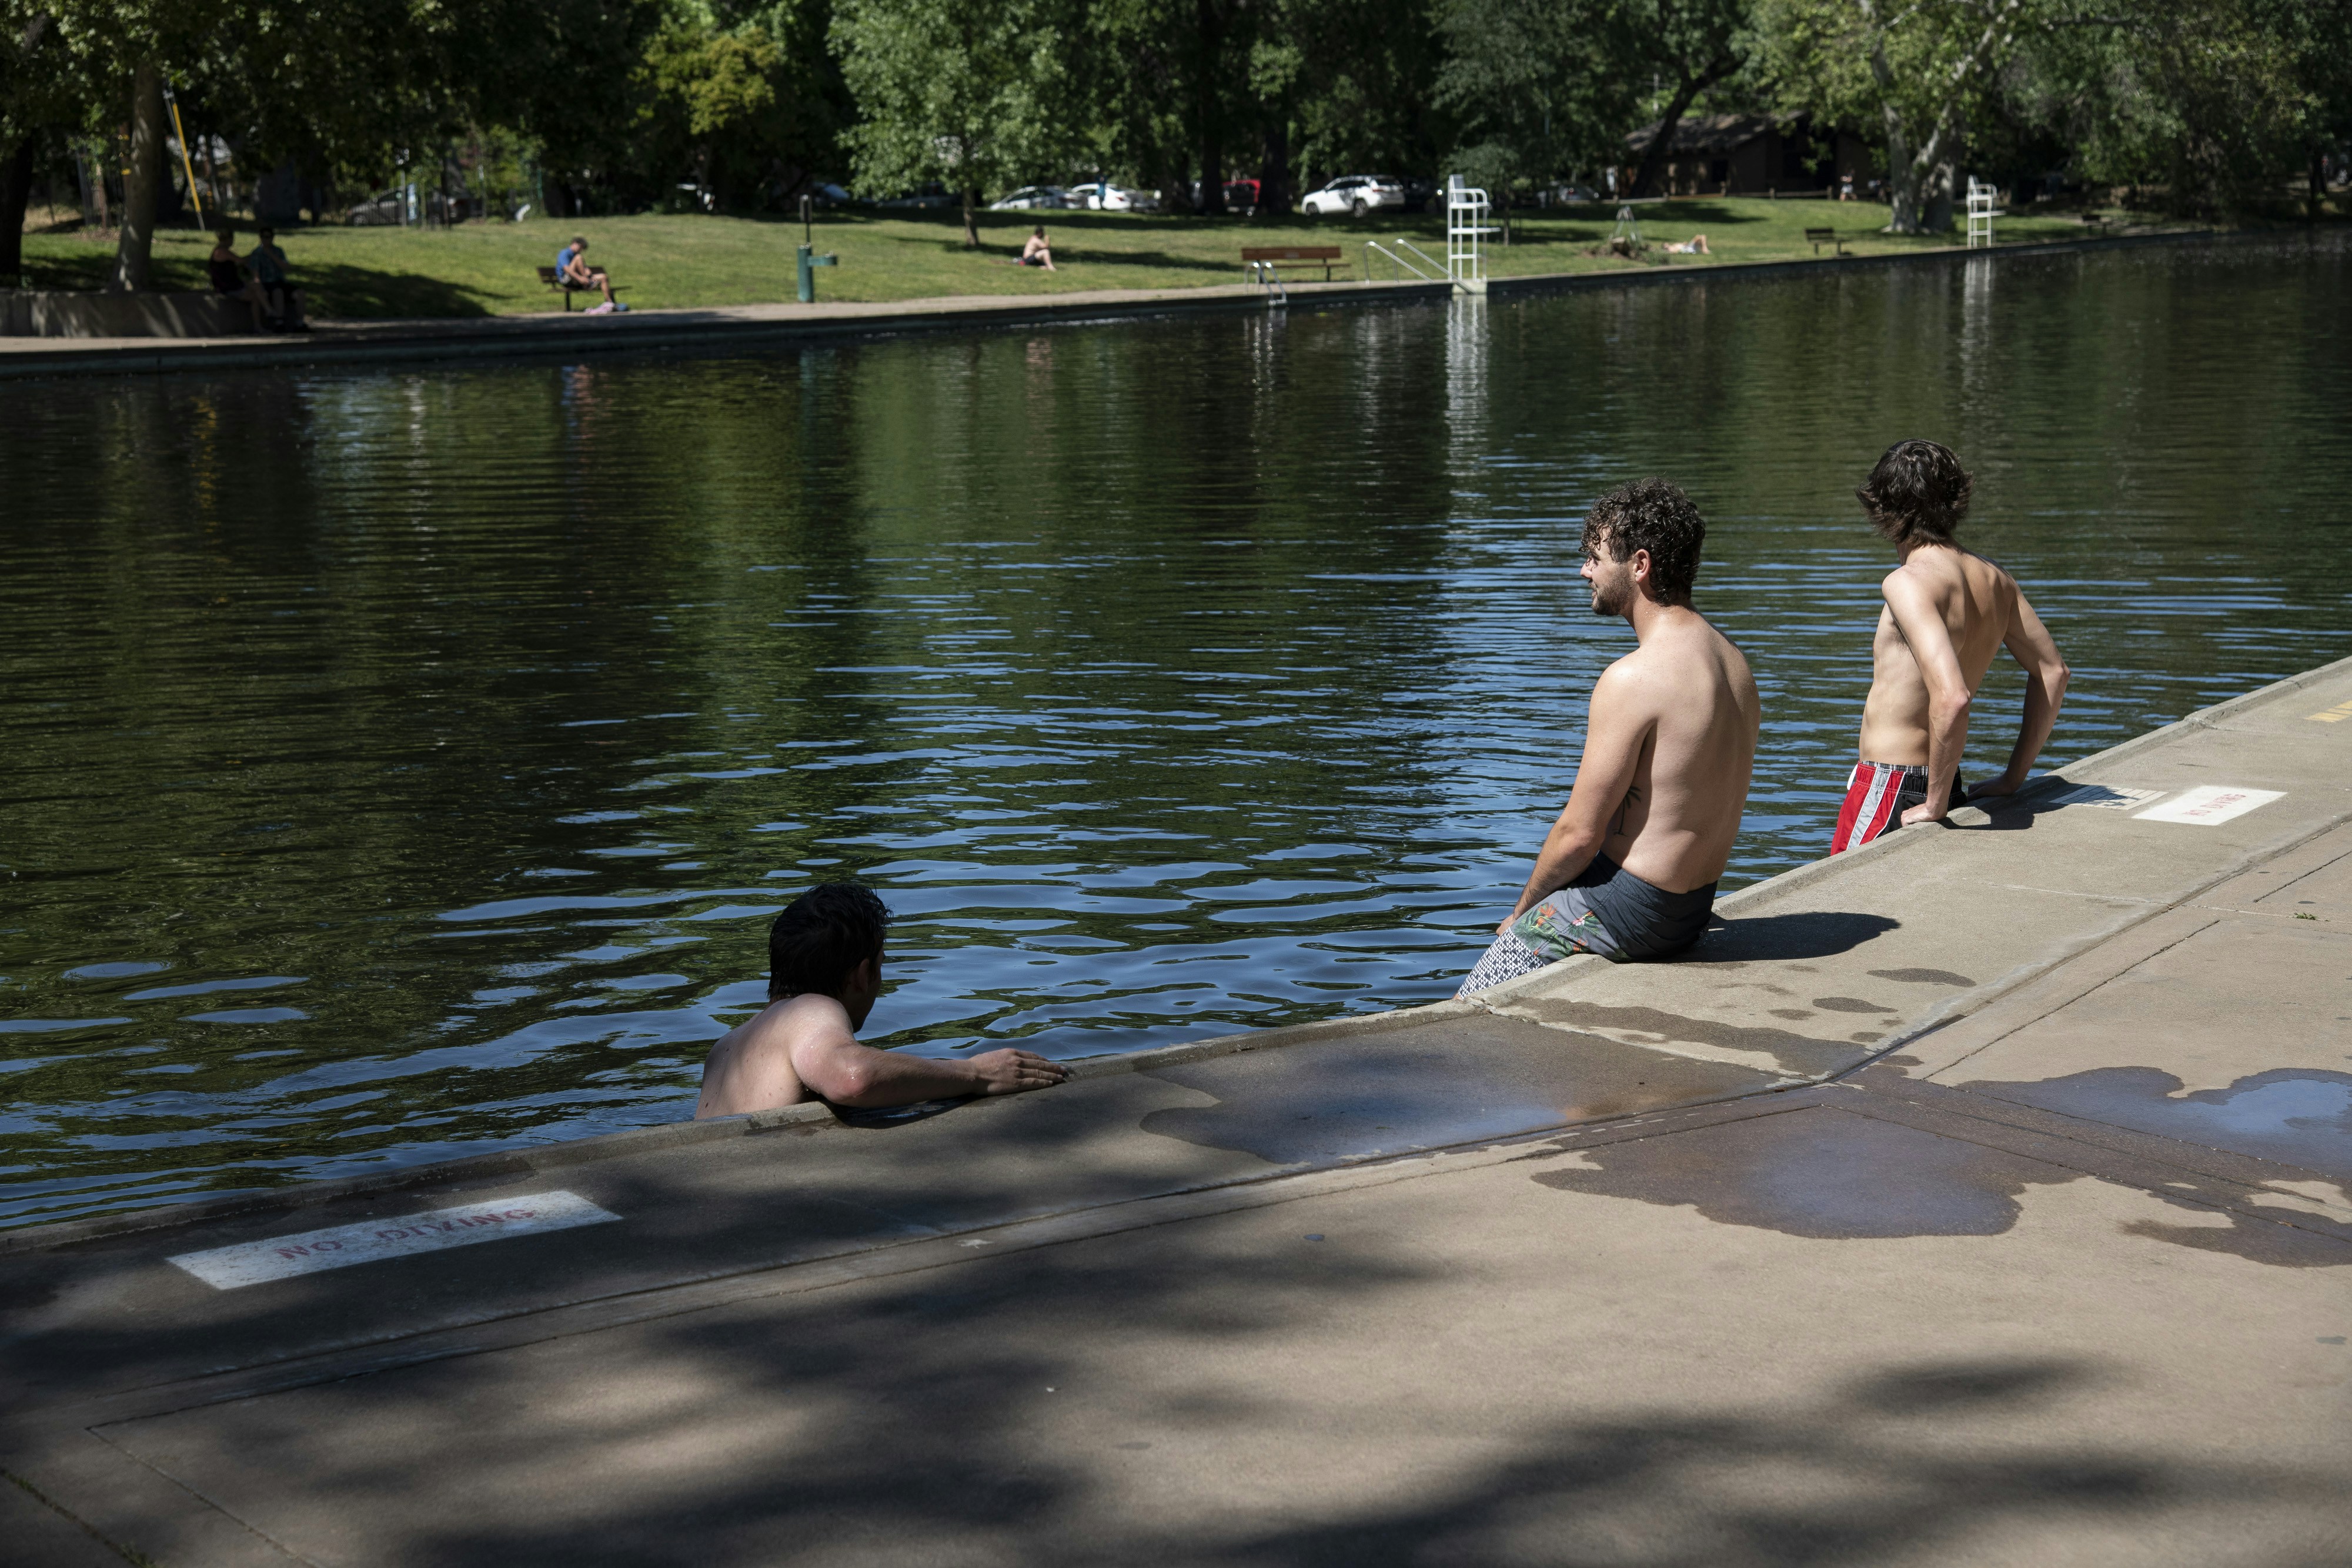 People enjoy the outdoors at Lower Bidwell Park in Chico, Calif. on Tuesday May 4, 2021.
Salgu Wissmath for The Intercept